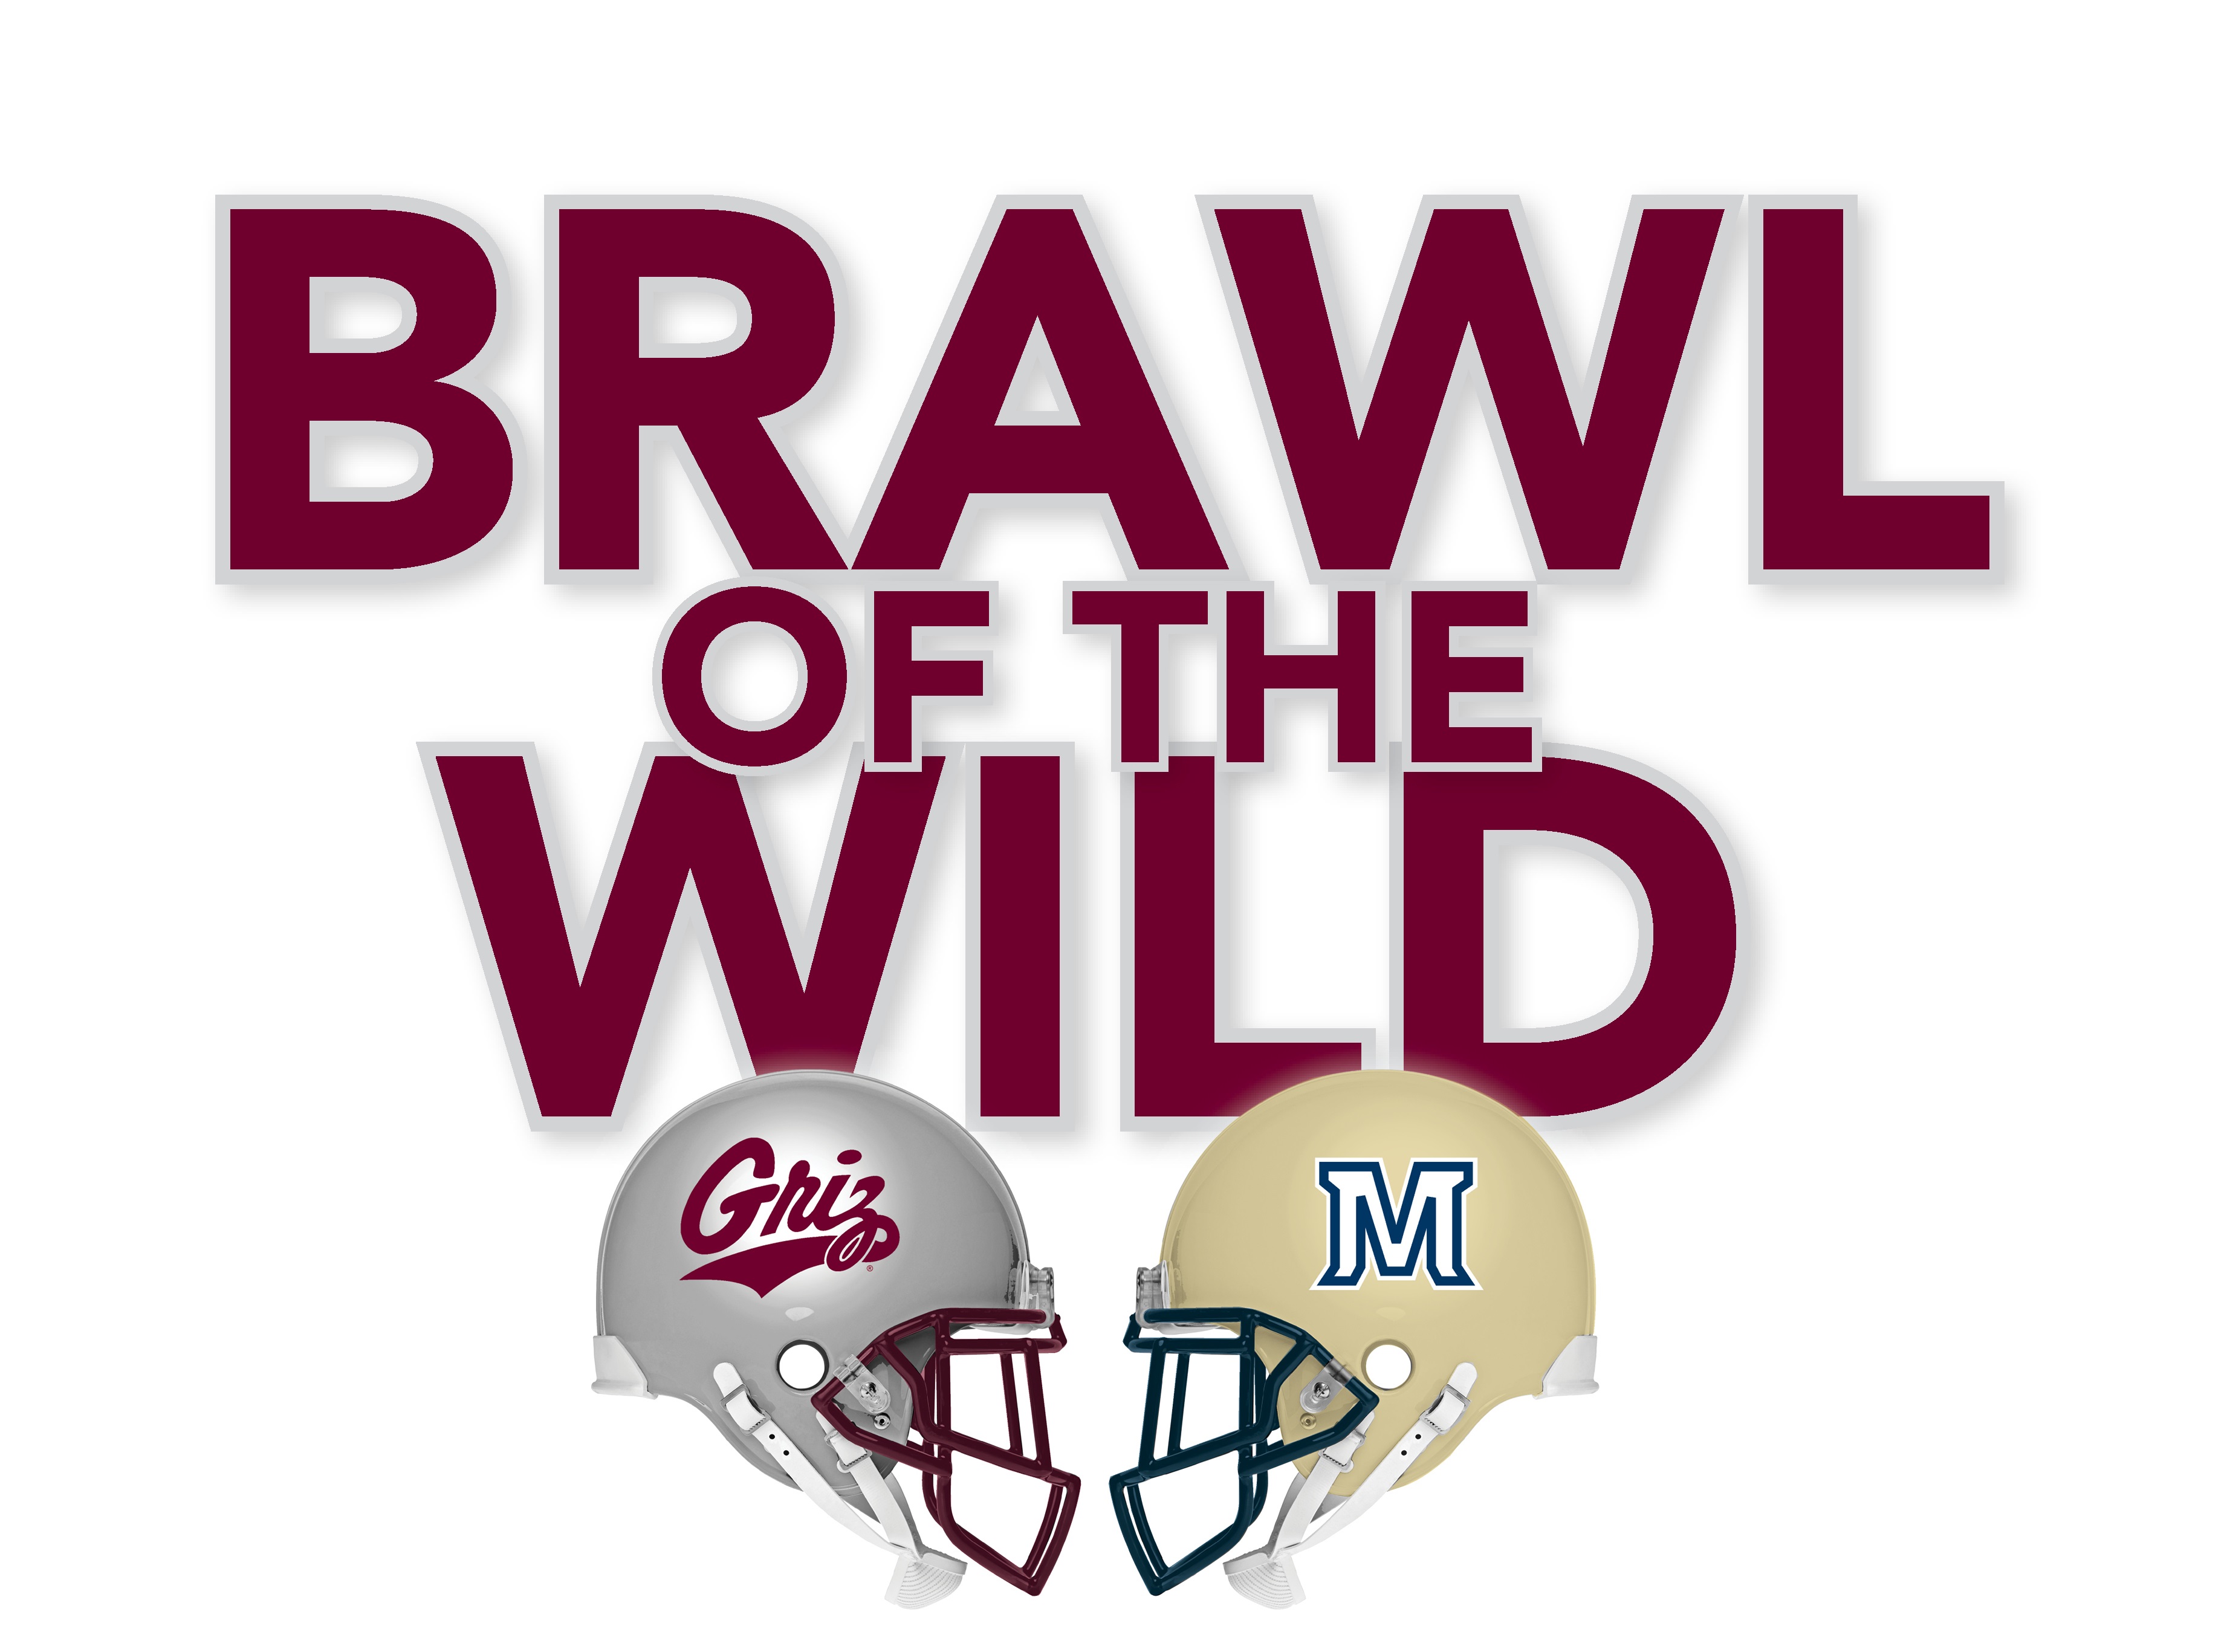 Brawl of the Wild graphic with UM and MSU helmets